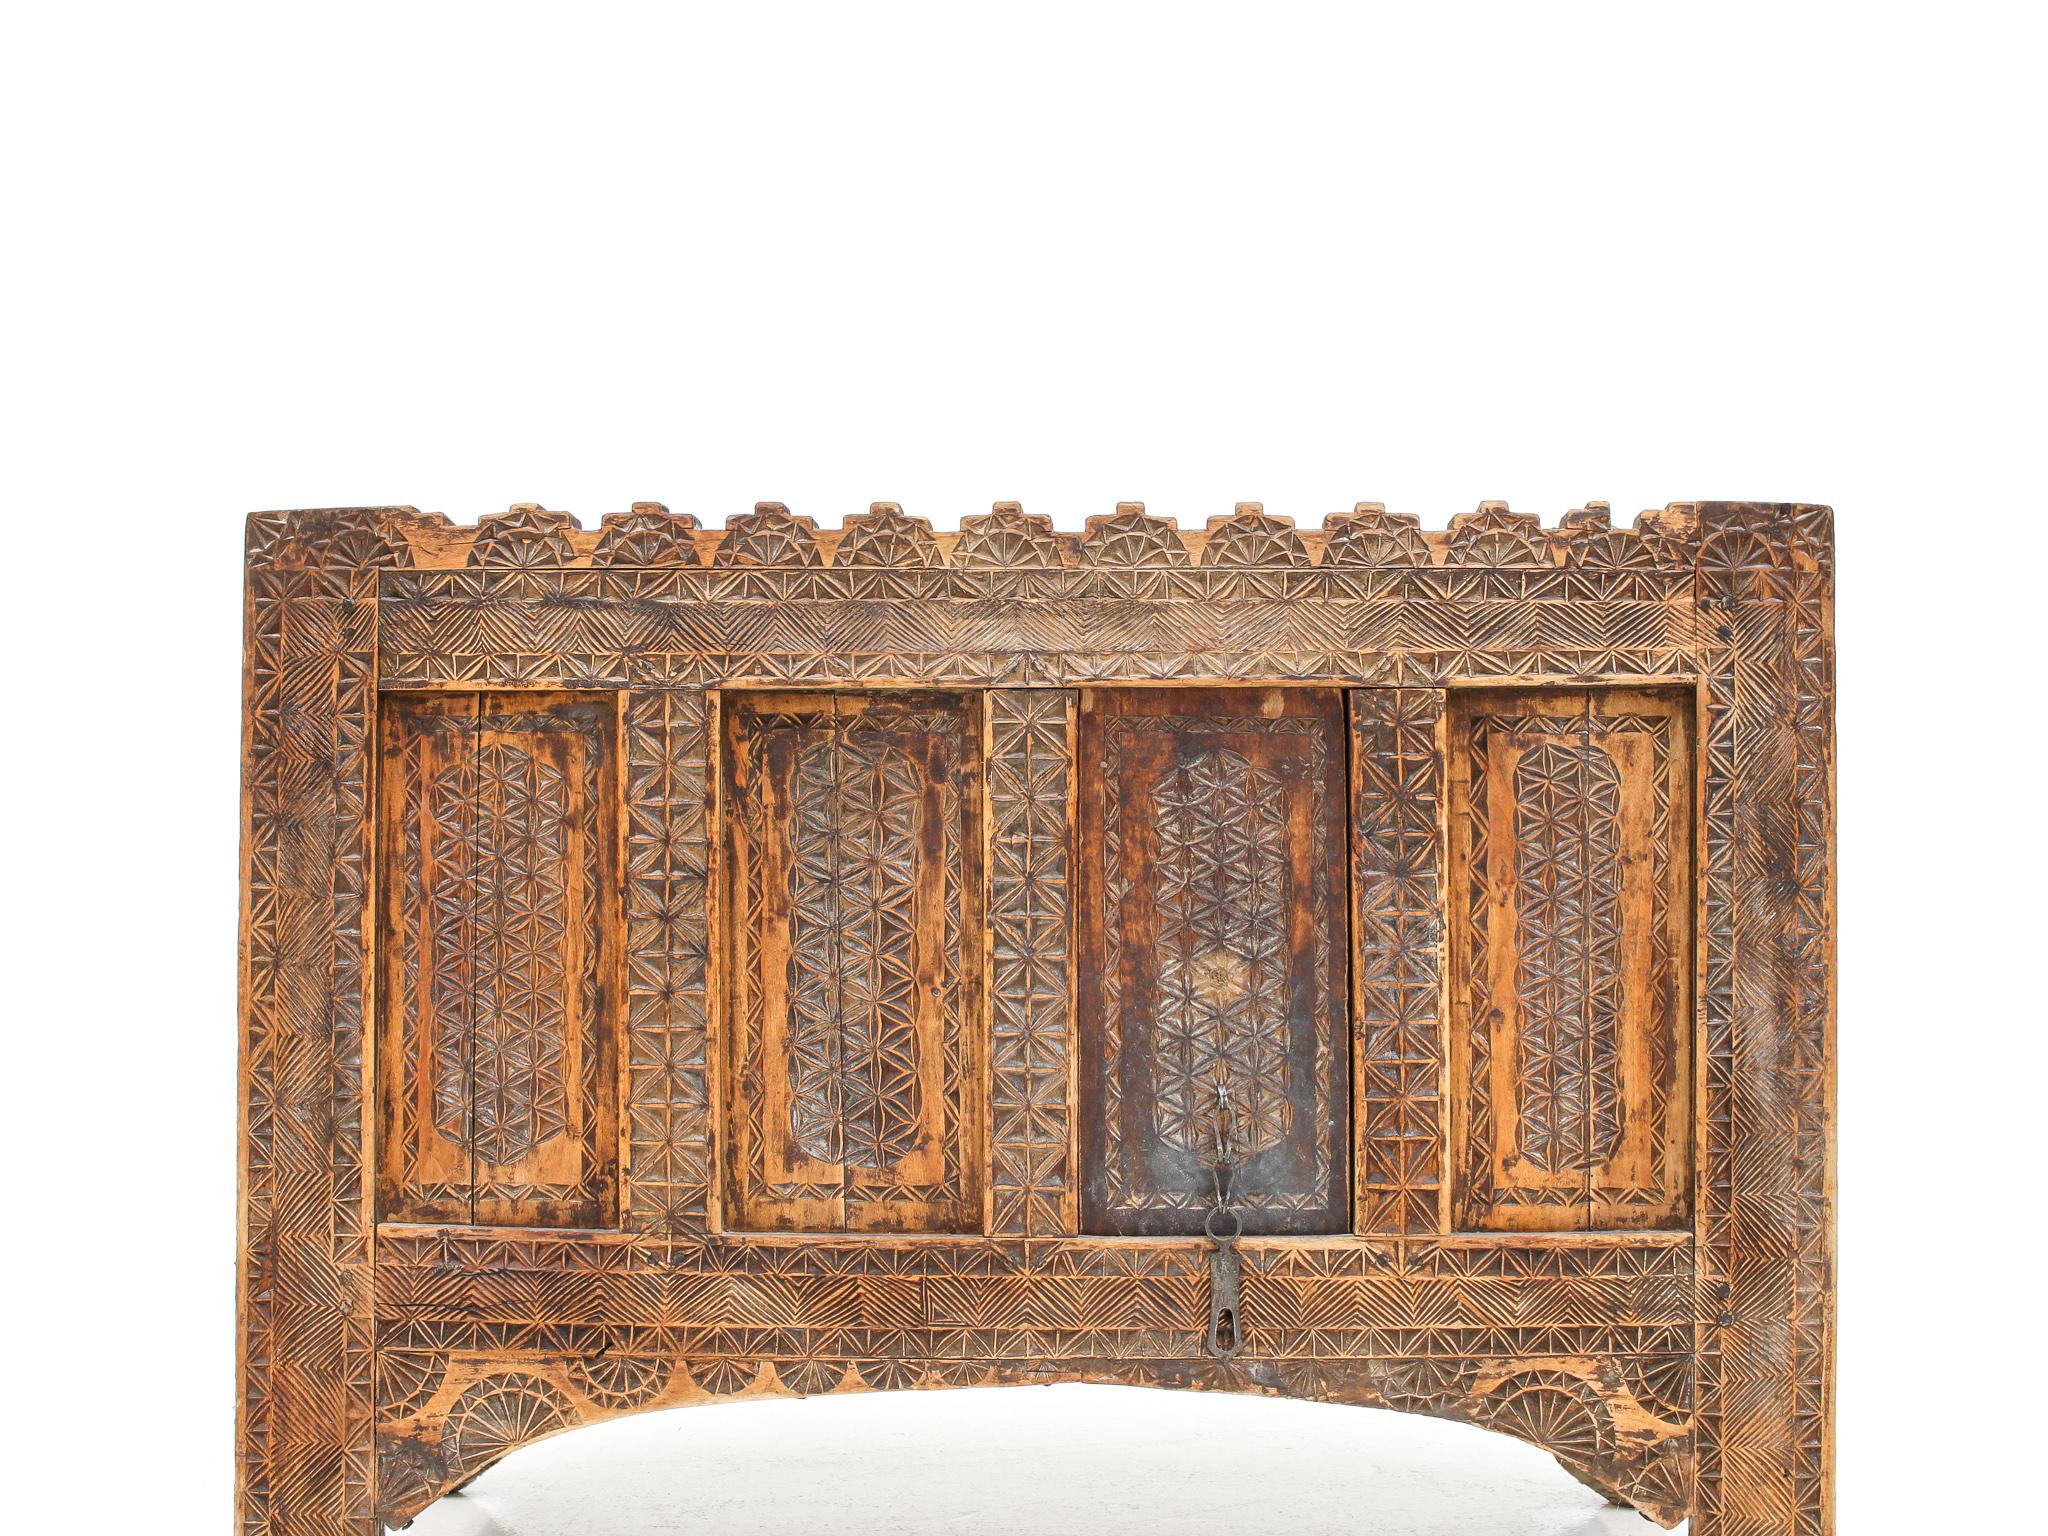 18th Century Antique c19th Century Carved Turkman Dowry Chest, Afghanistan, Central Asia